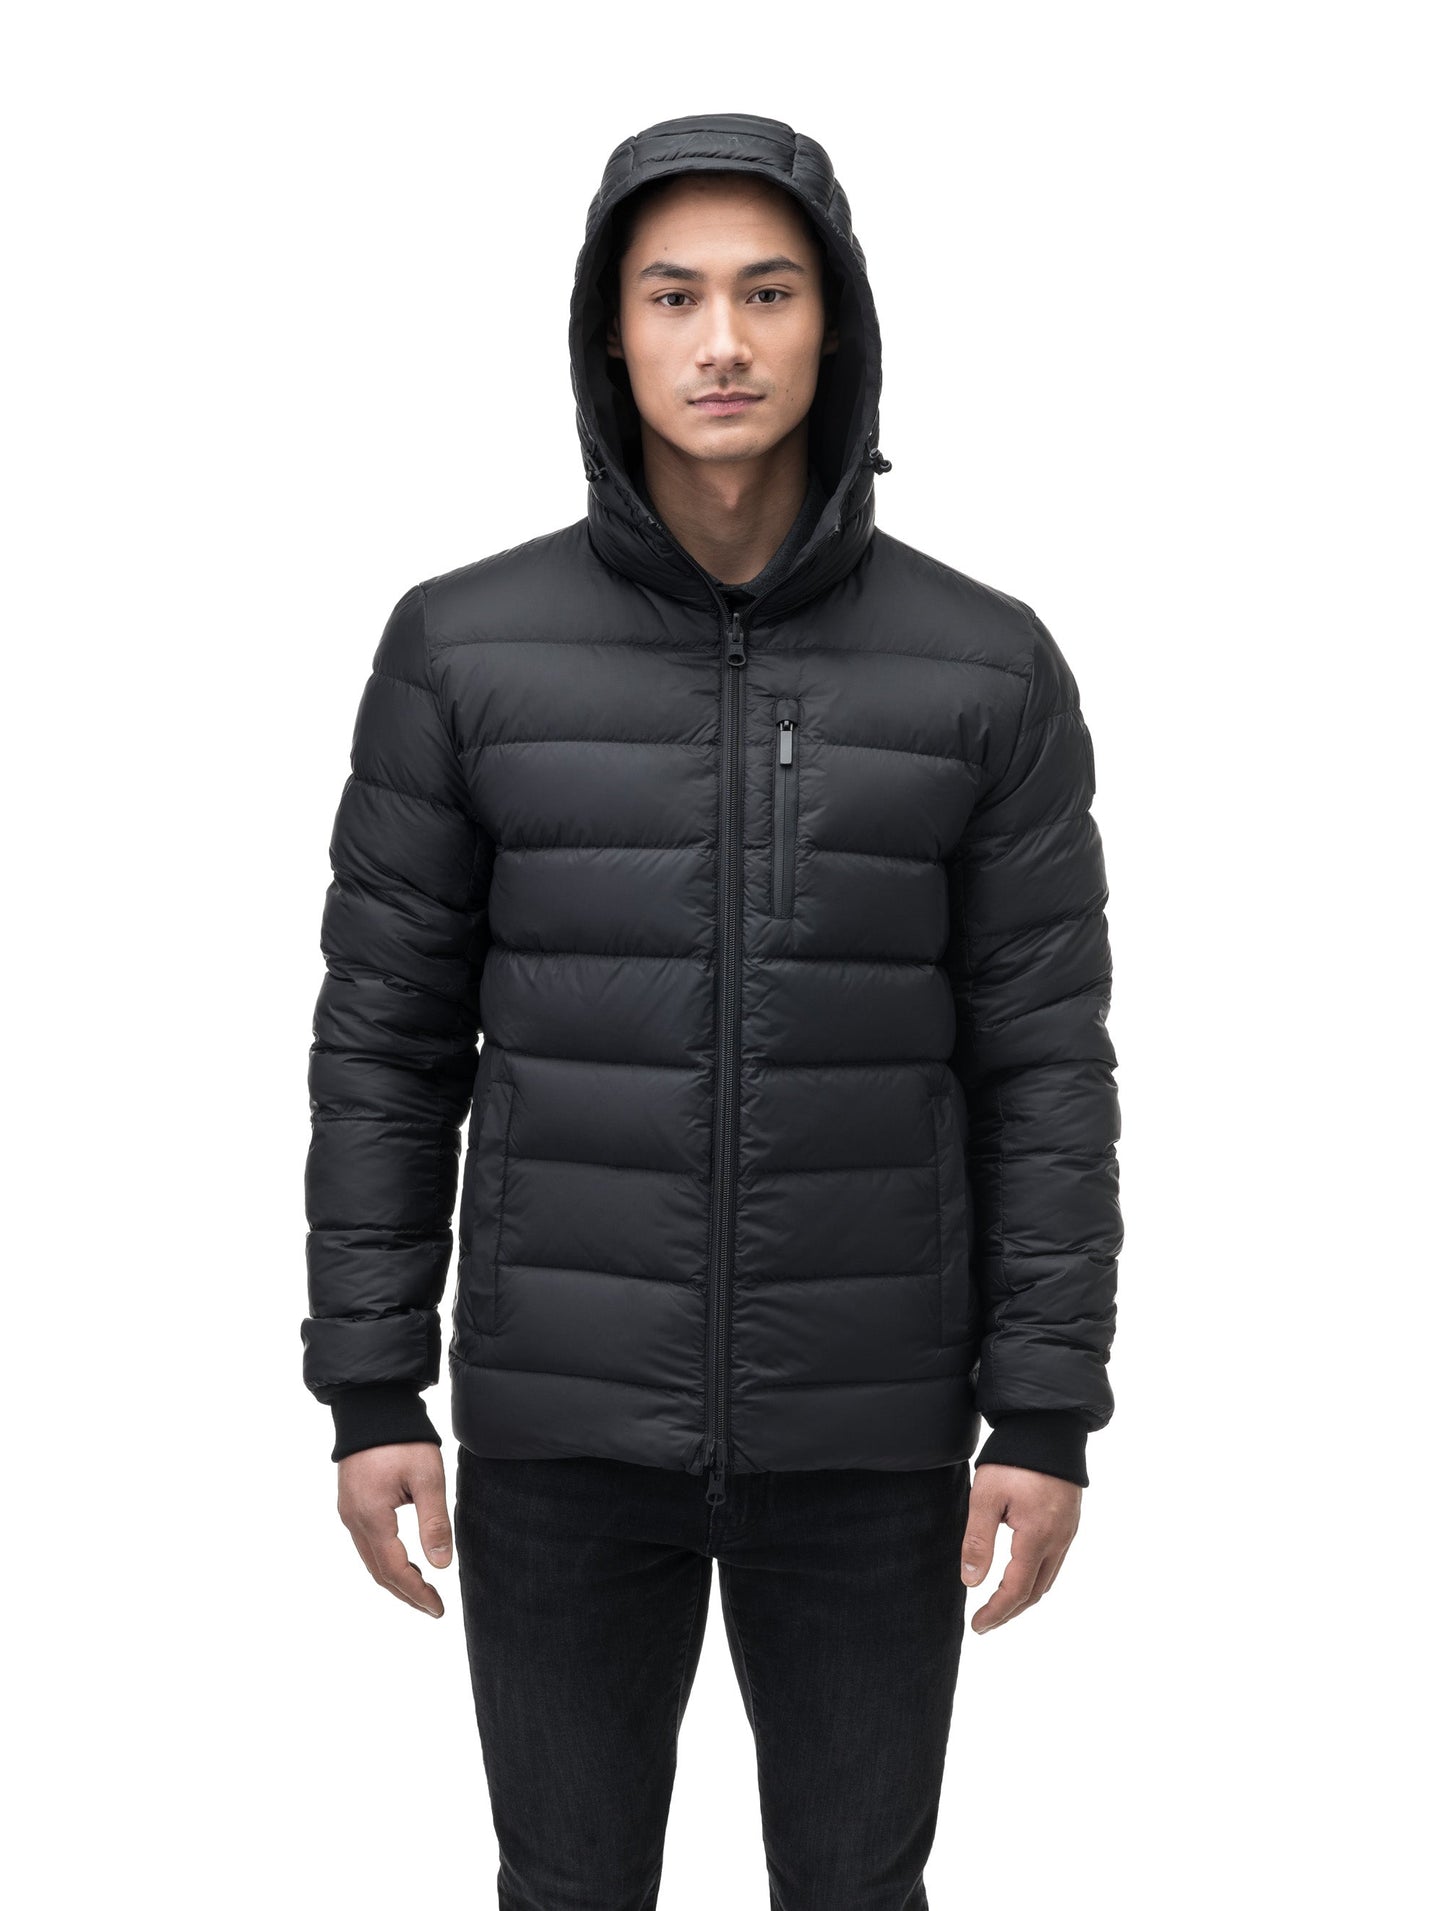 Chris Men's Mid Weight Reversible Puffer Jacket in hip length, Canadian duck down insulation, non-removable adjustable hood, ribbed cuffs, and quilted body on reversible side, in Black